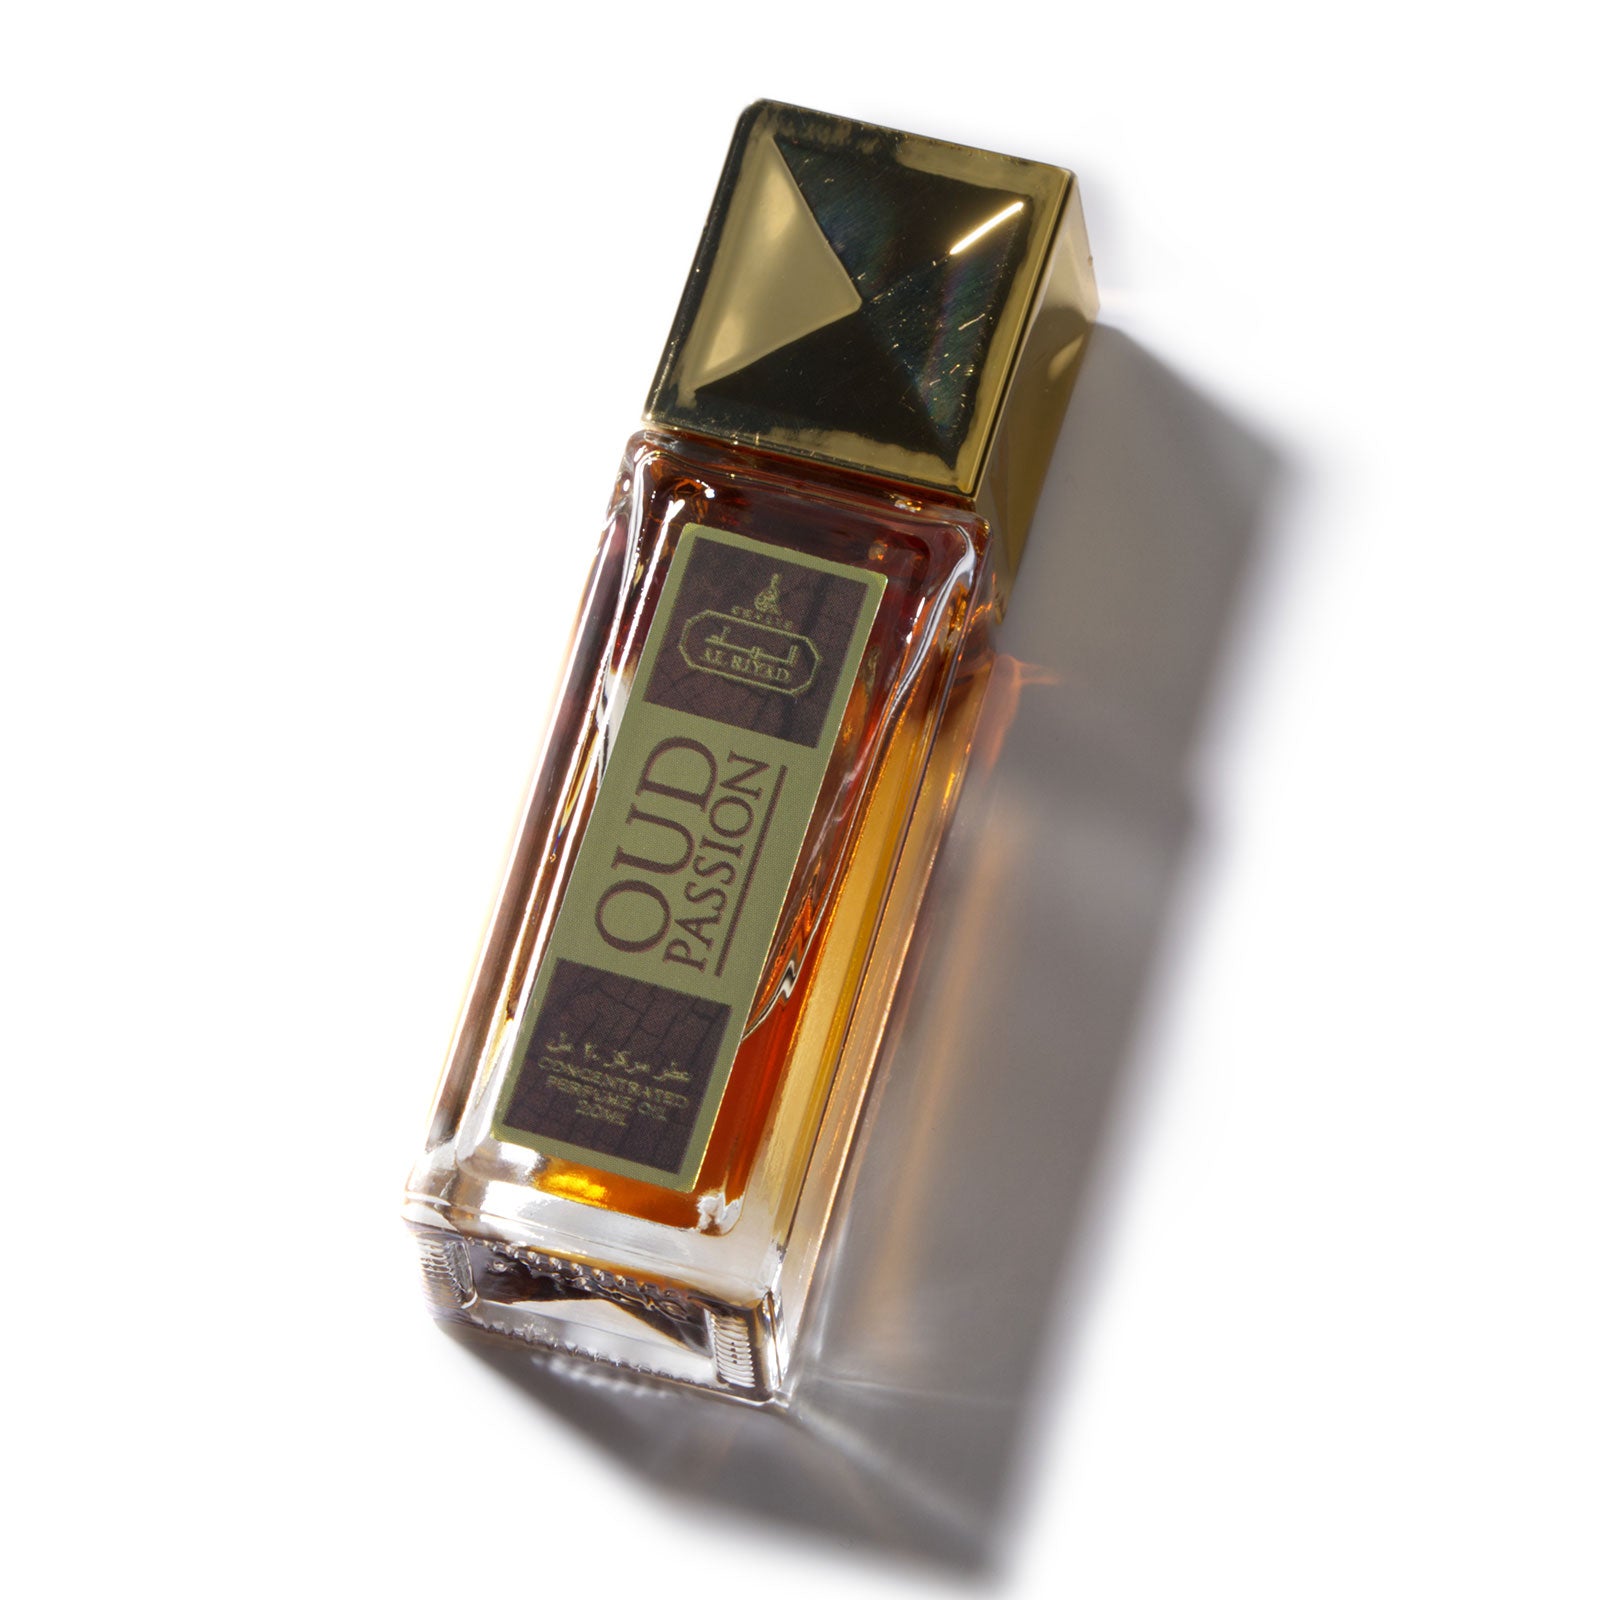 OUD PASSION 20 ML OIL (Roll On)